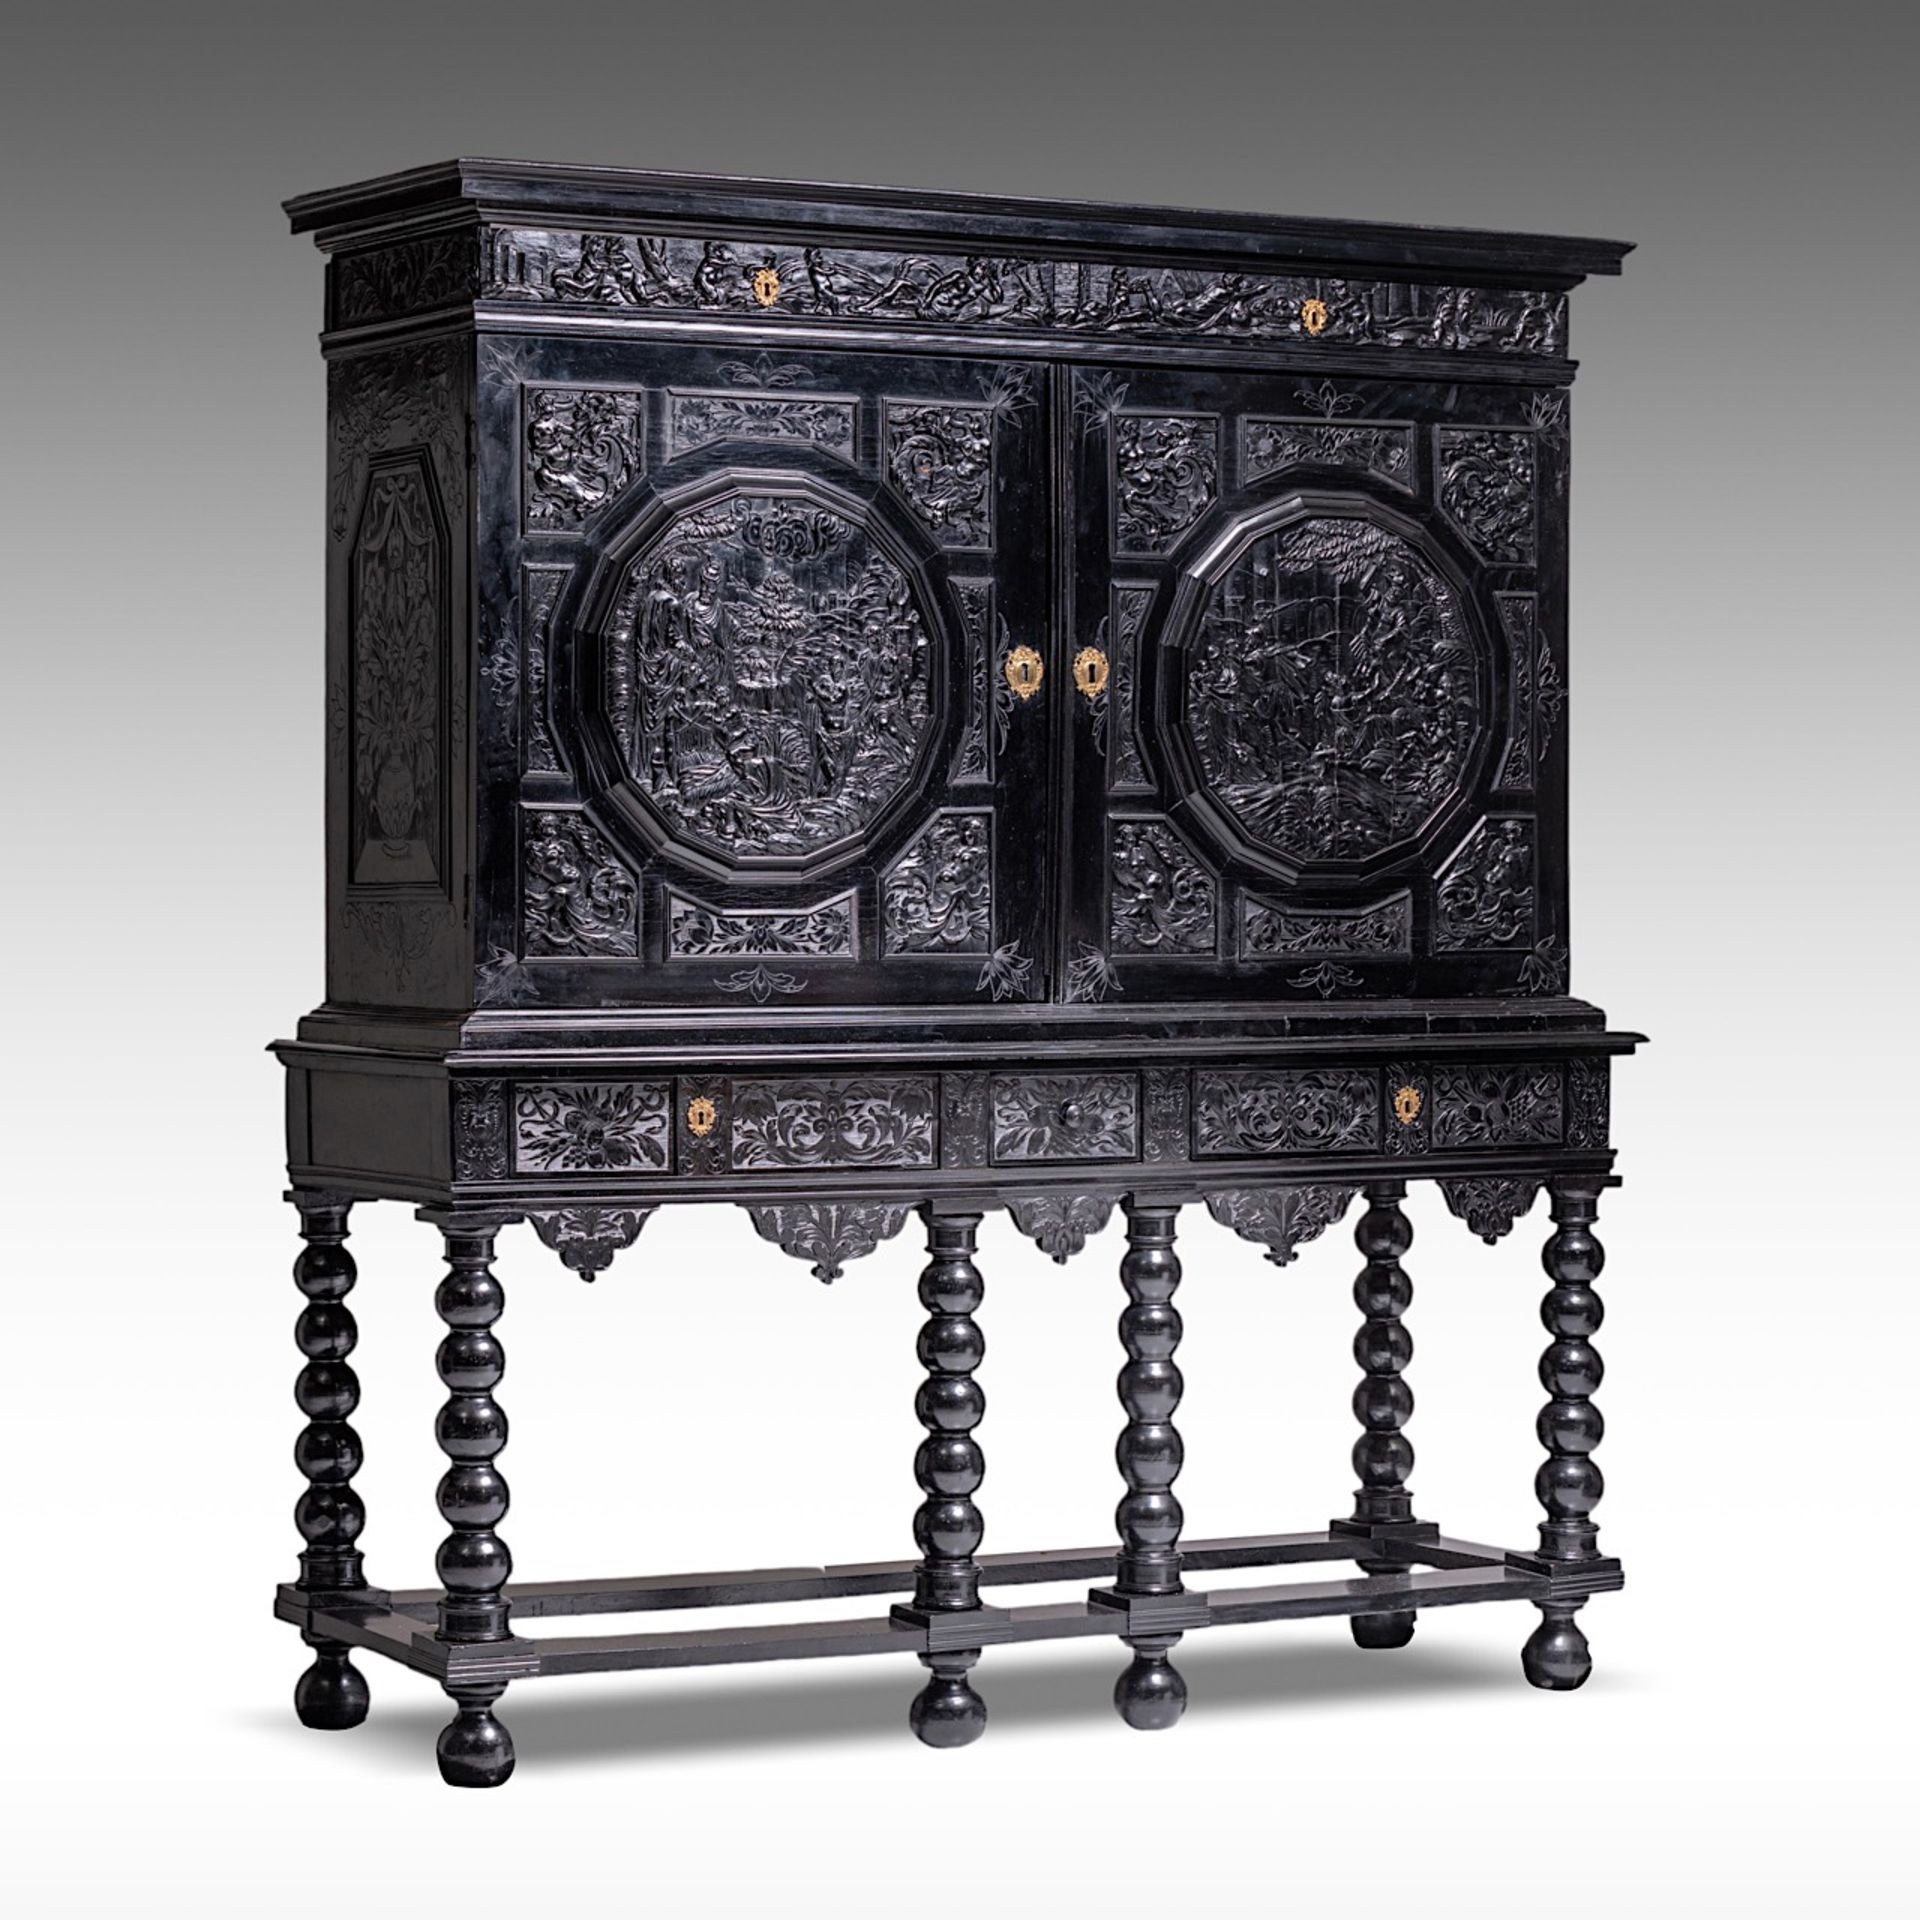 PREMIUM LOT - An exceptional 17thC French ebony and ebonised cabinet-on-stand, H 181,5 - W 163 - D 5 - Bild 4 aus 14